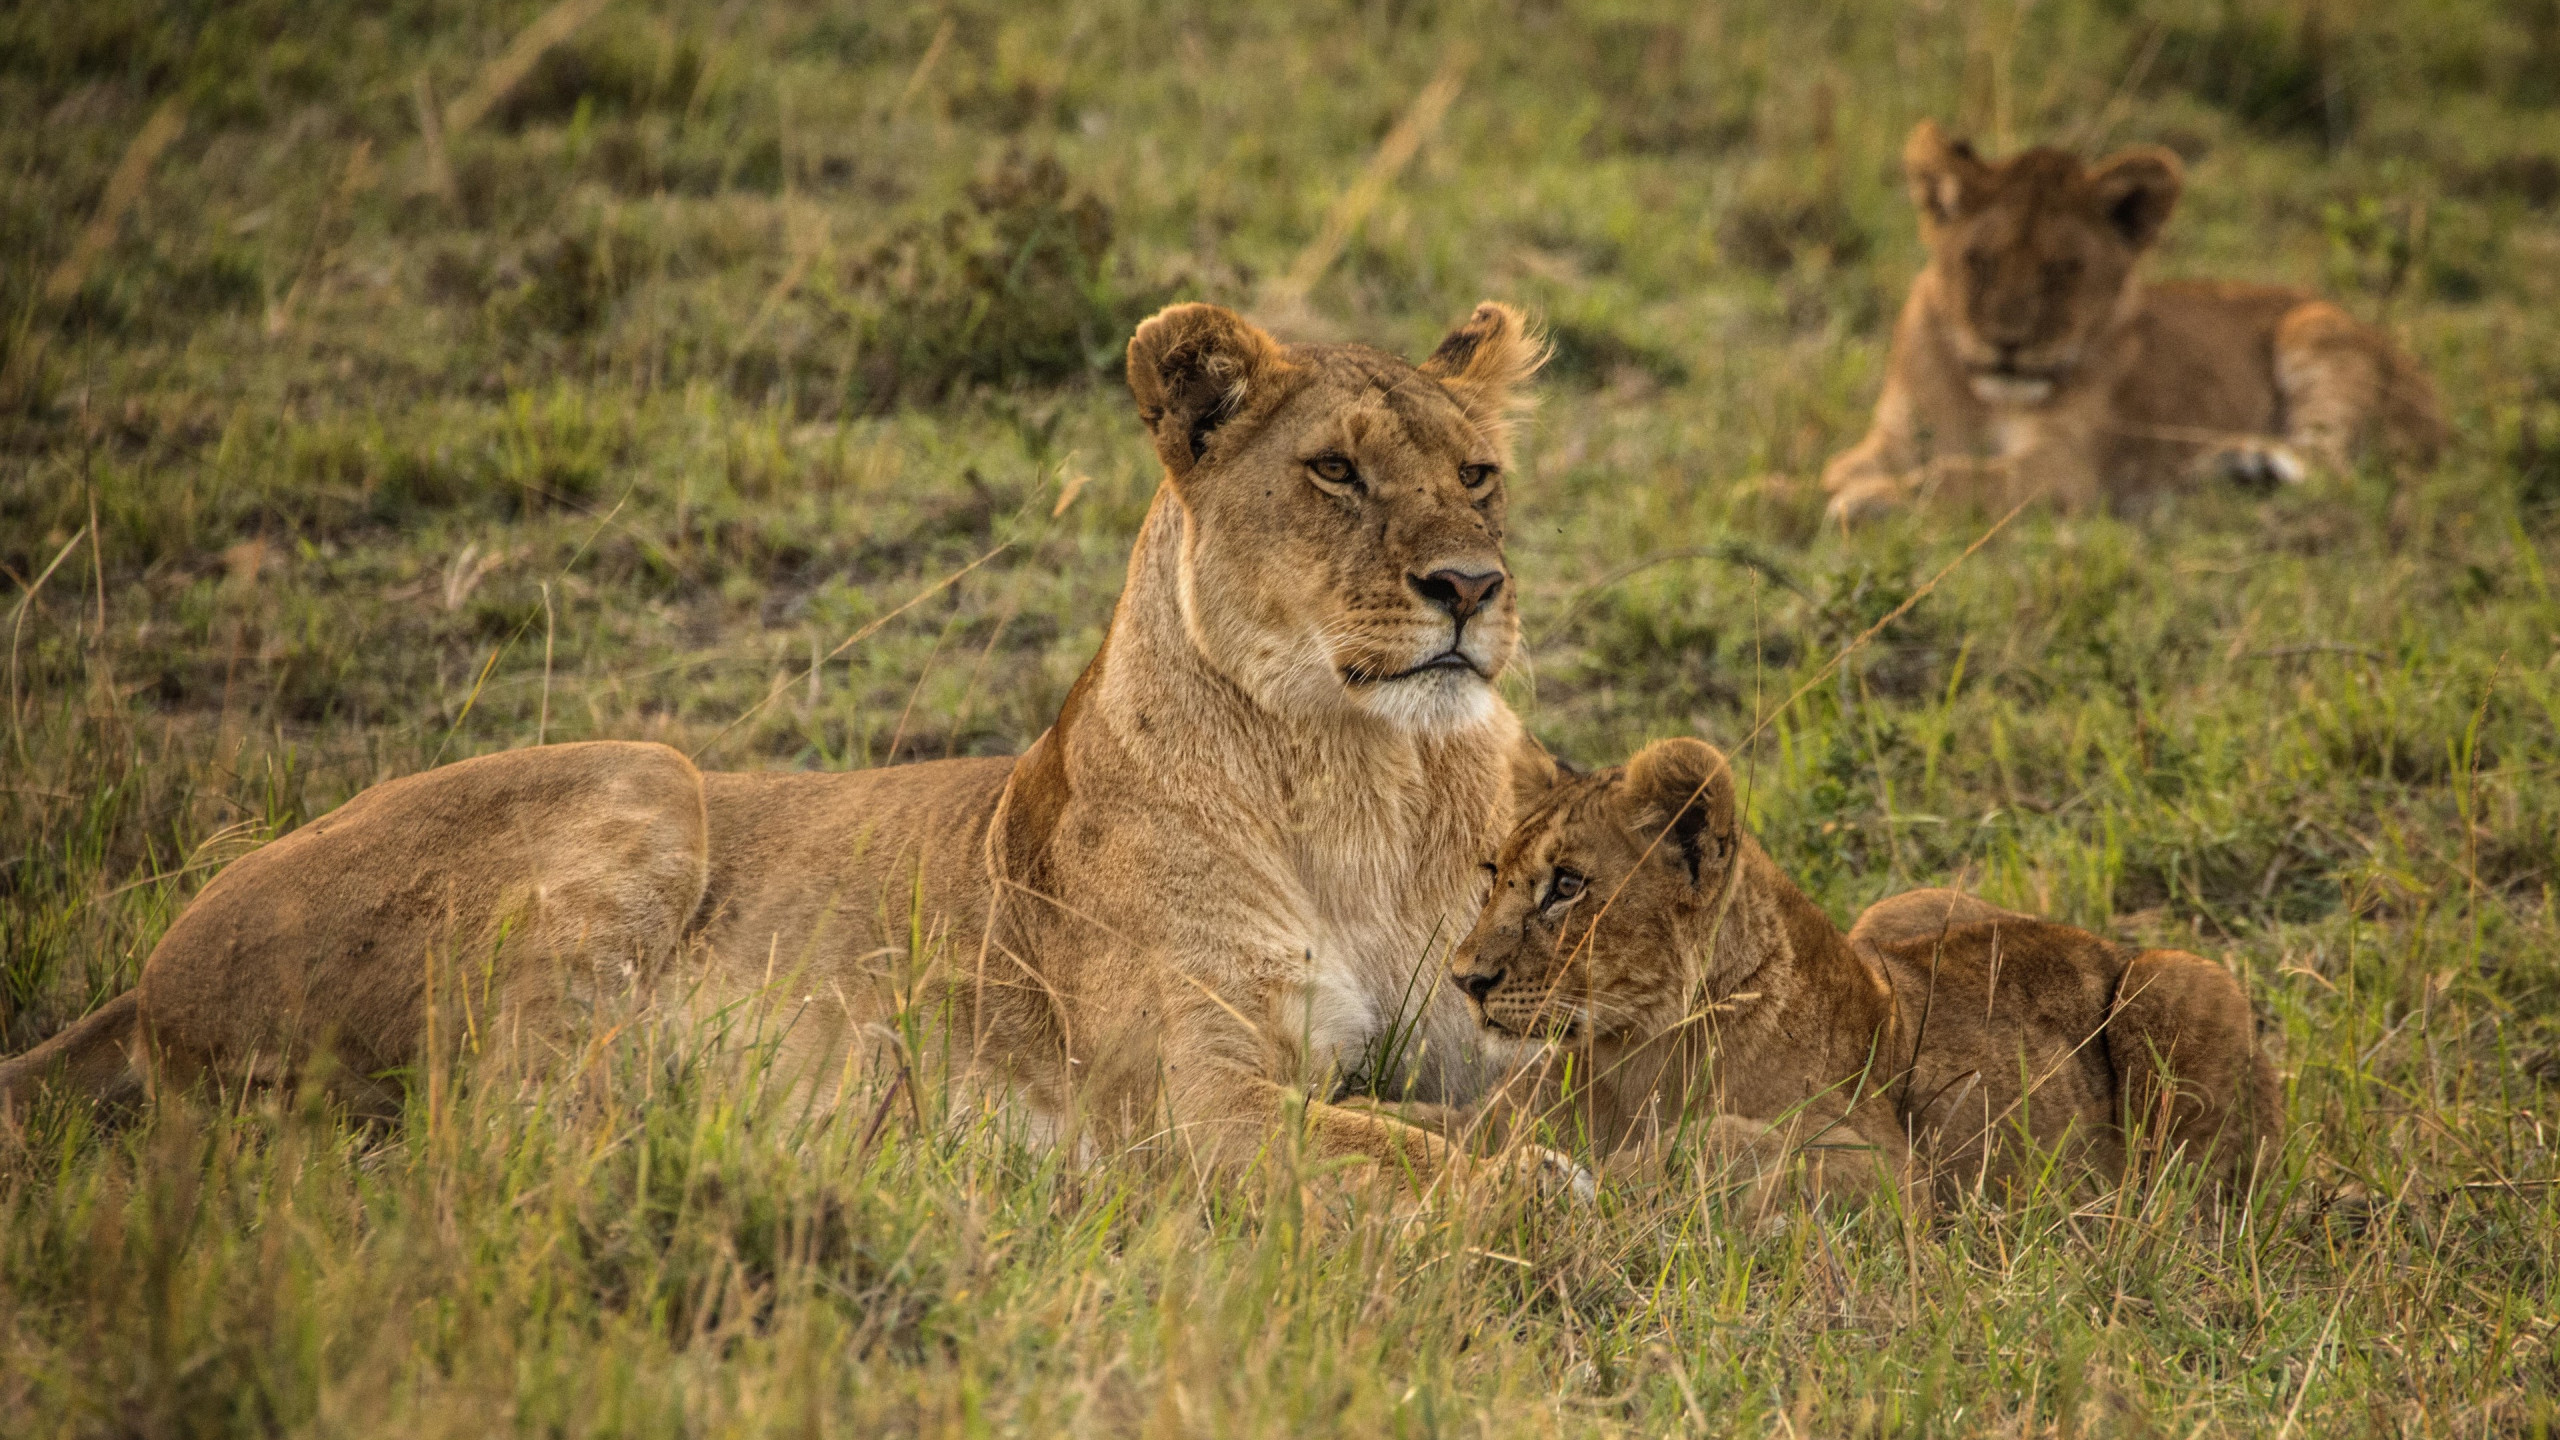 Lioness with cubs from Serengeti wallpaper 2560x1440